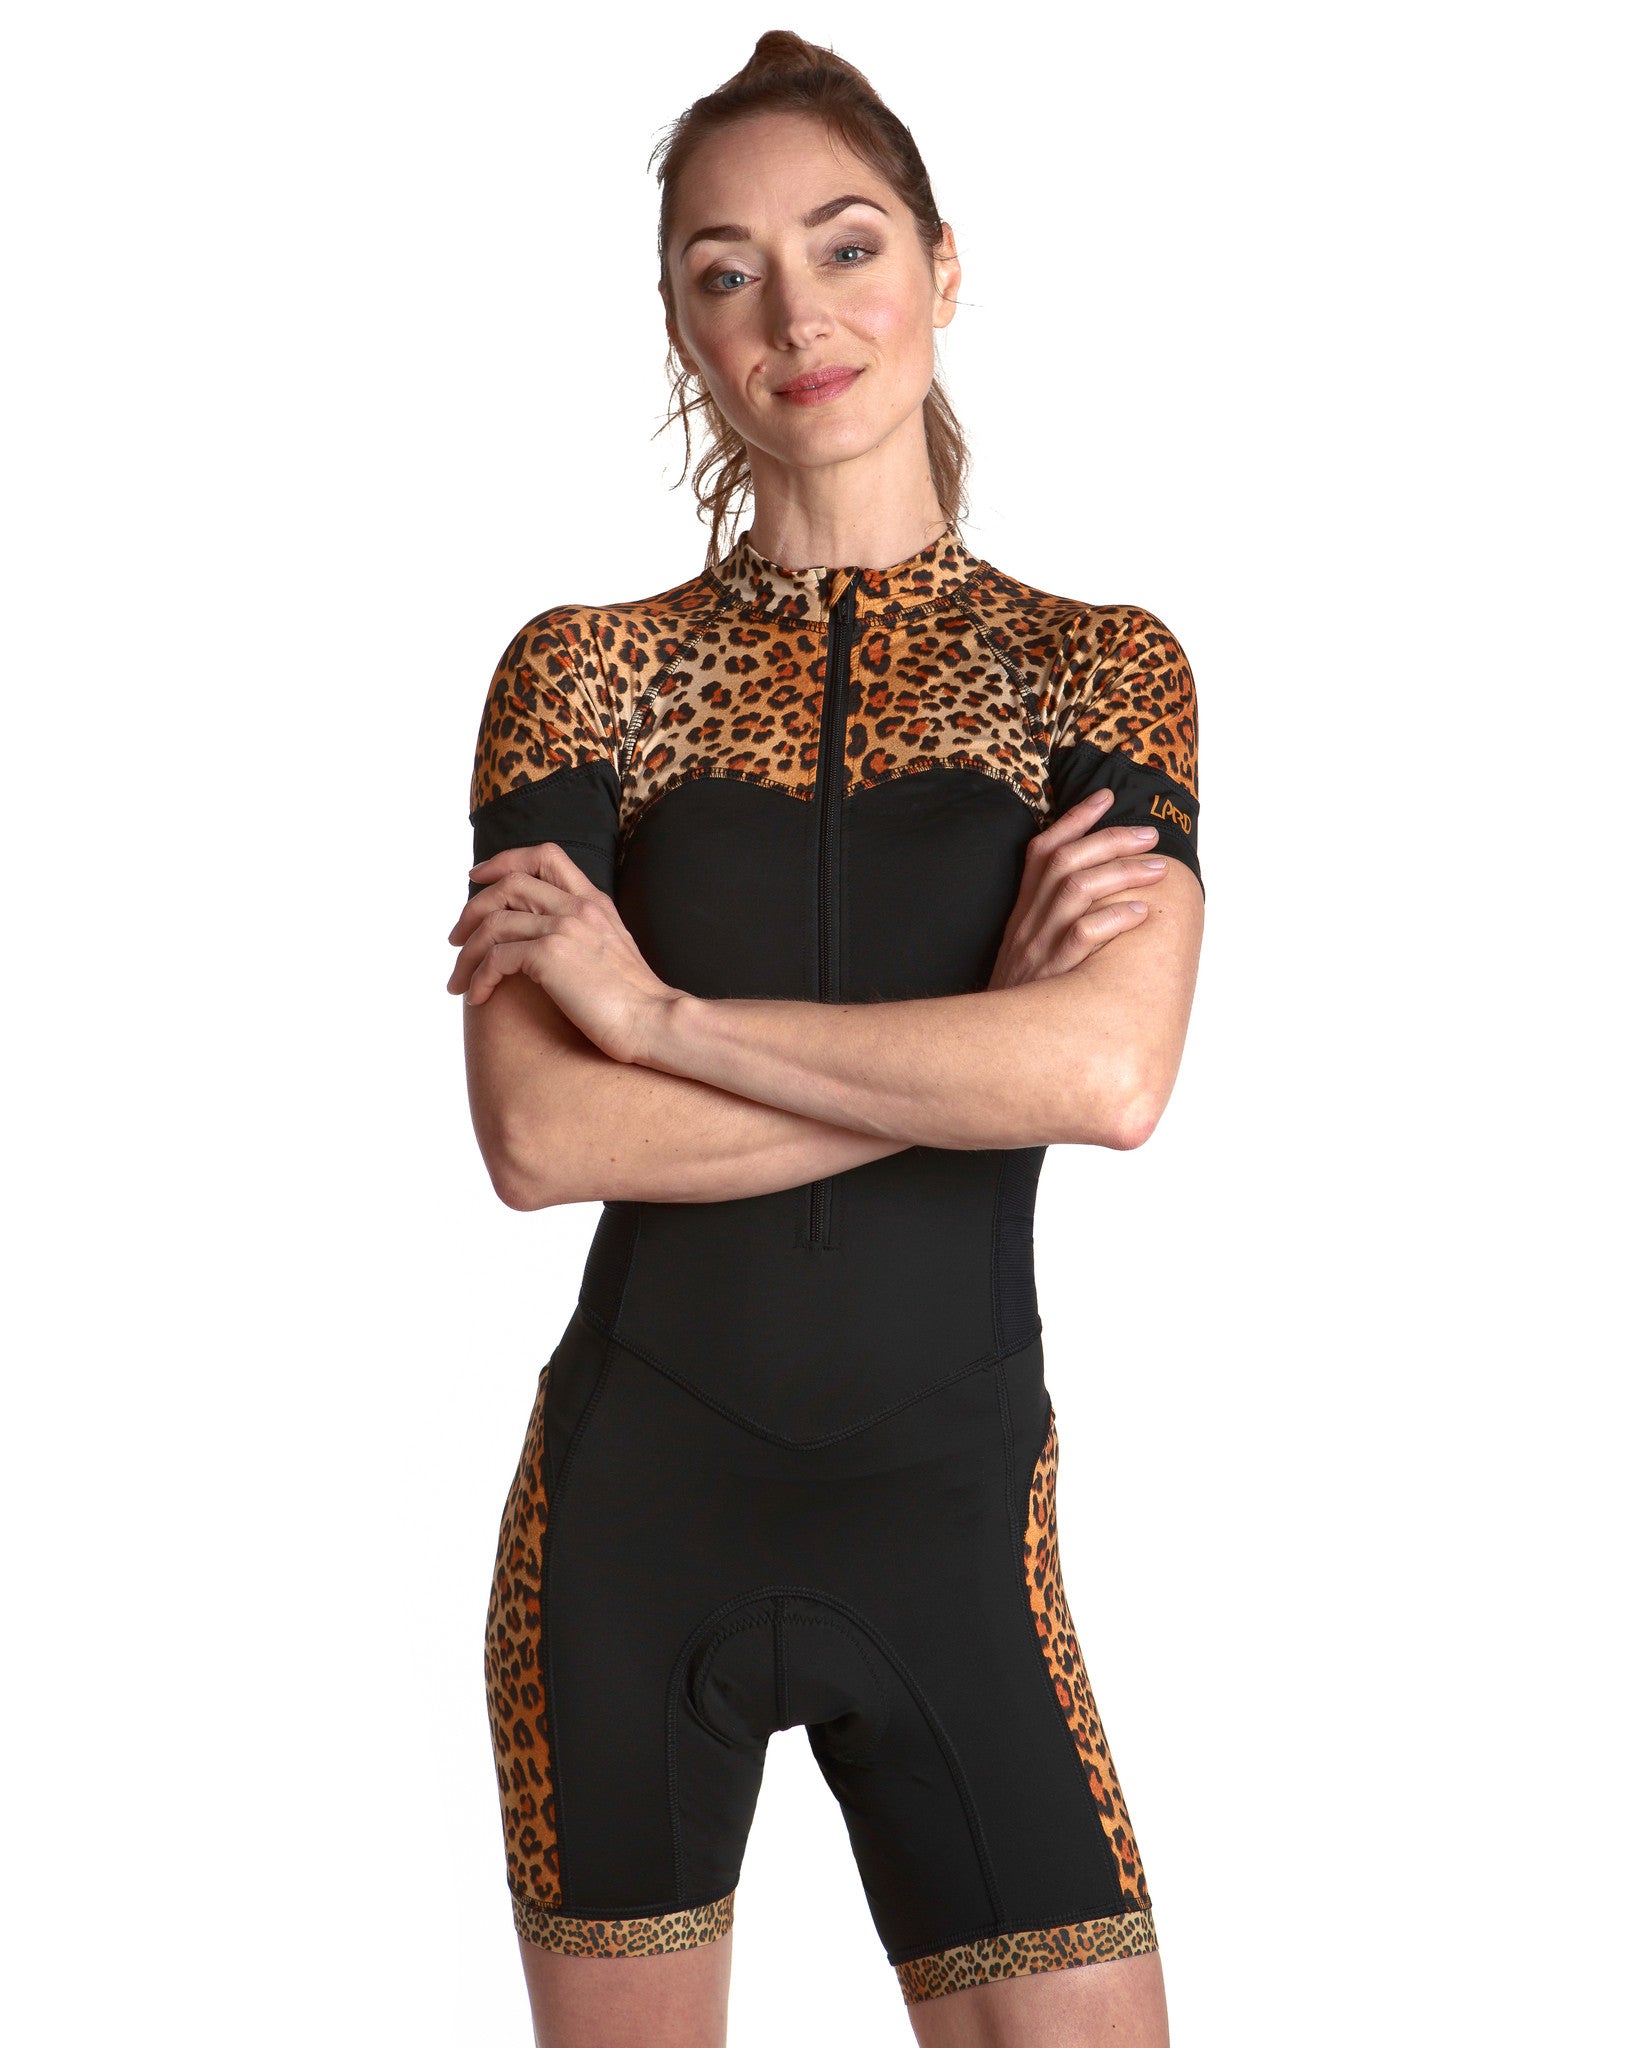 LPRD Black with Leopard Panel Cycling Skinsuit | Close-up Front View